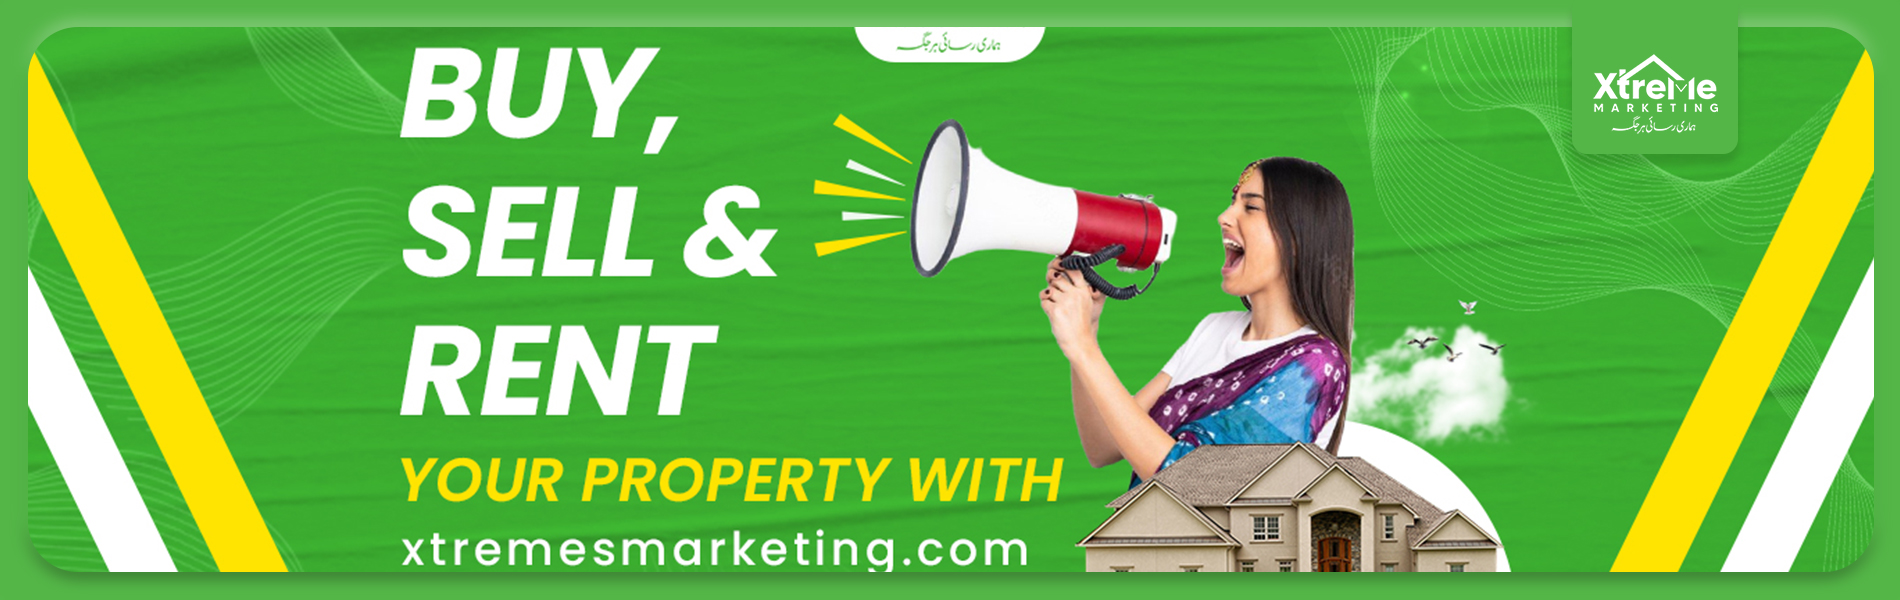 top 5 real estate agents in Peshawar xtremes